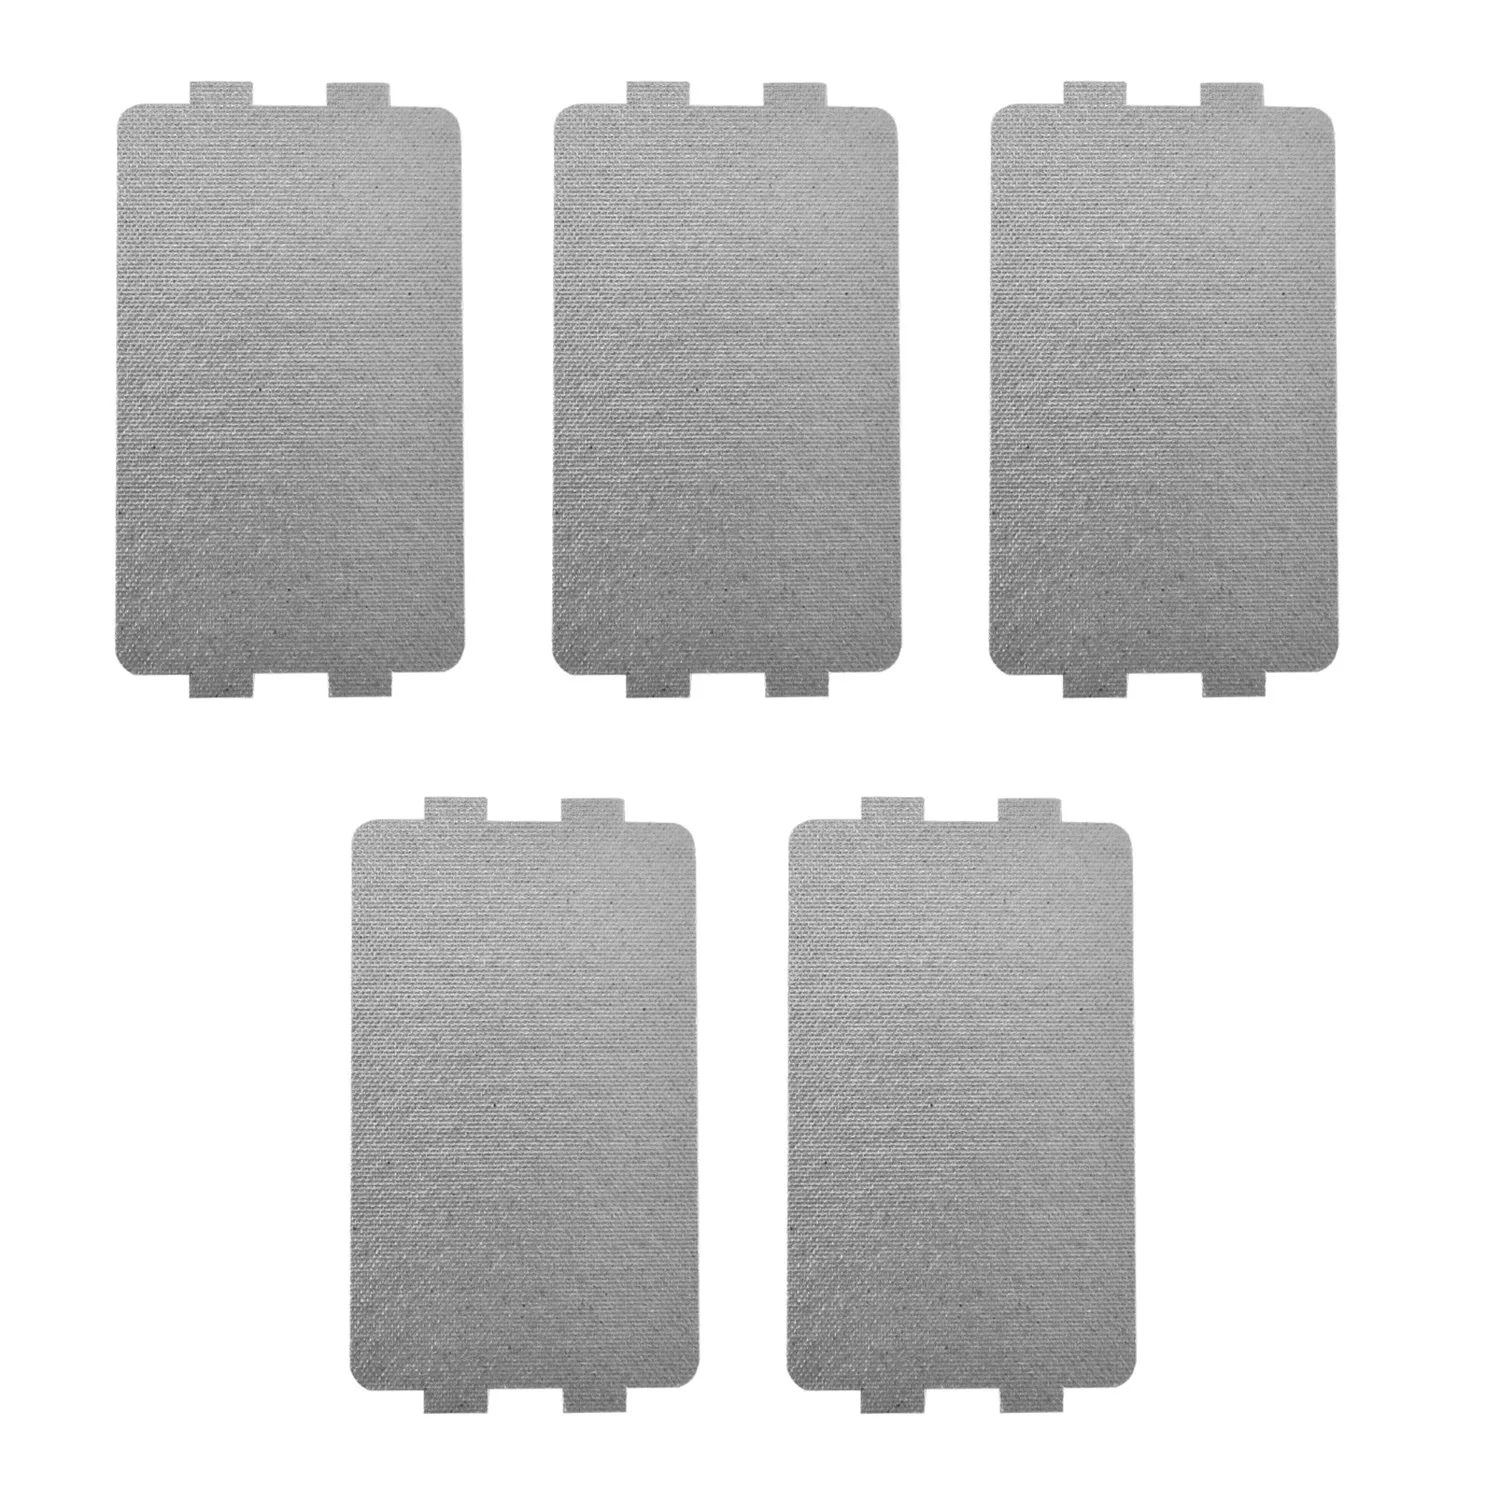 

5 X Mica Plate Universal Microwave Oven Mica Sheet Wave Guide Waveguide Cover Sheet Plates Sheets For Galanz Midea LG Microwave